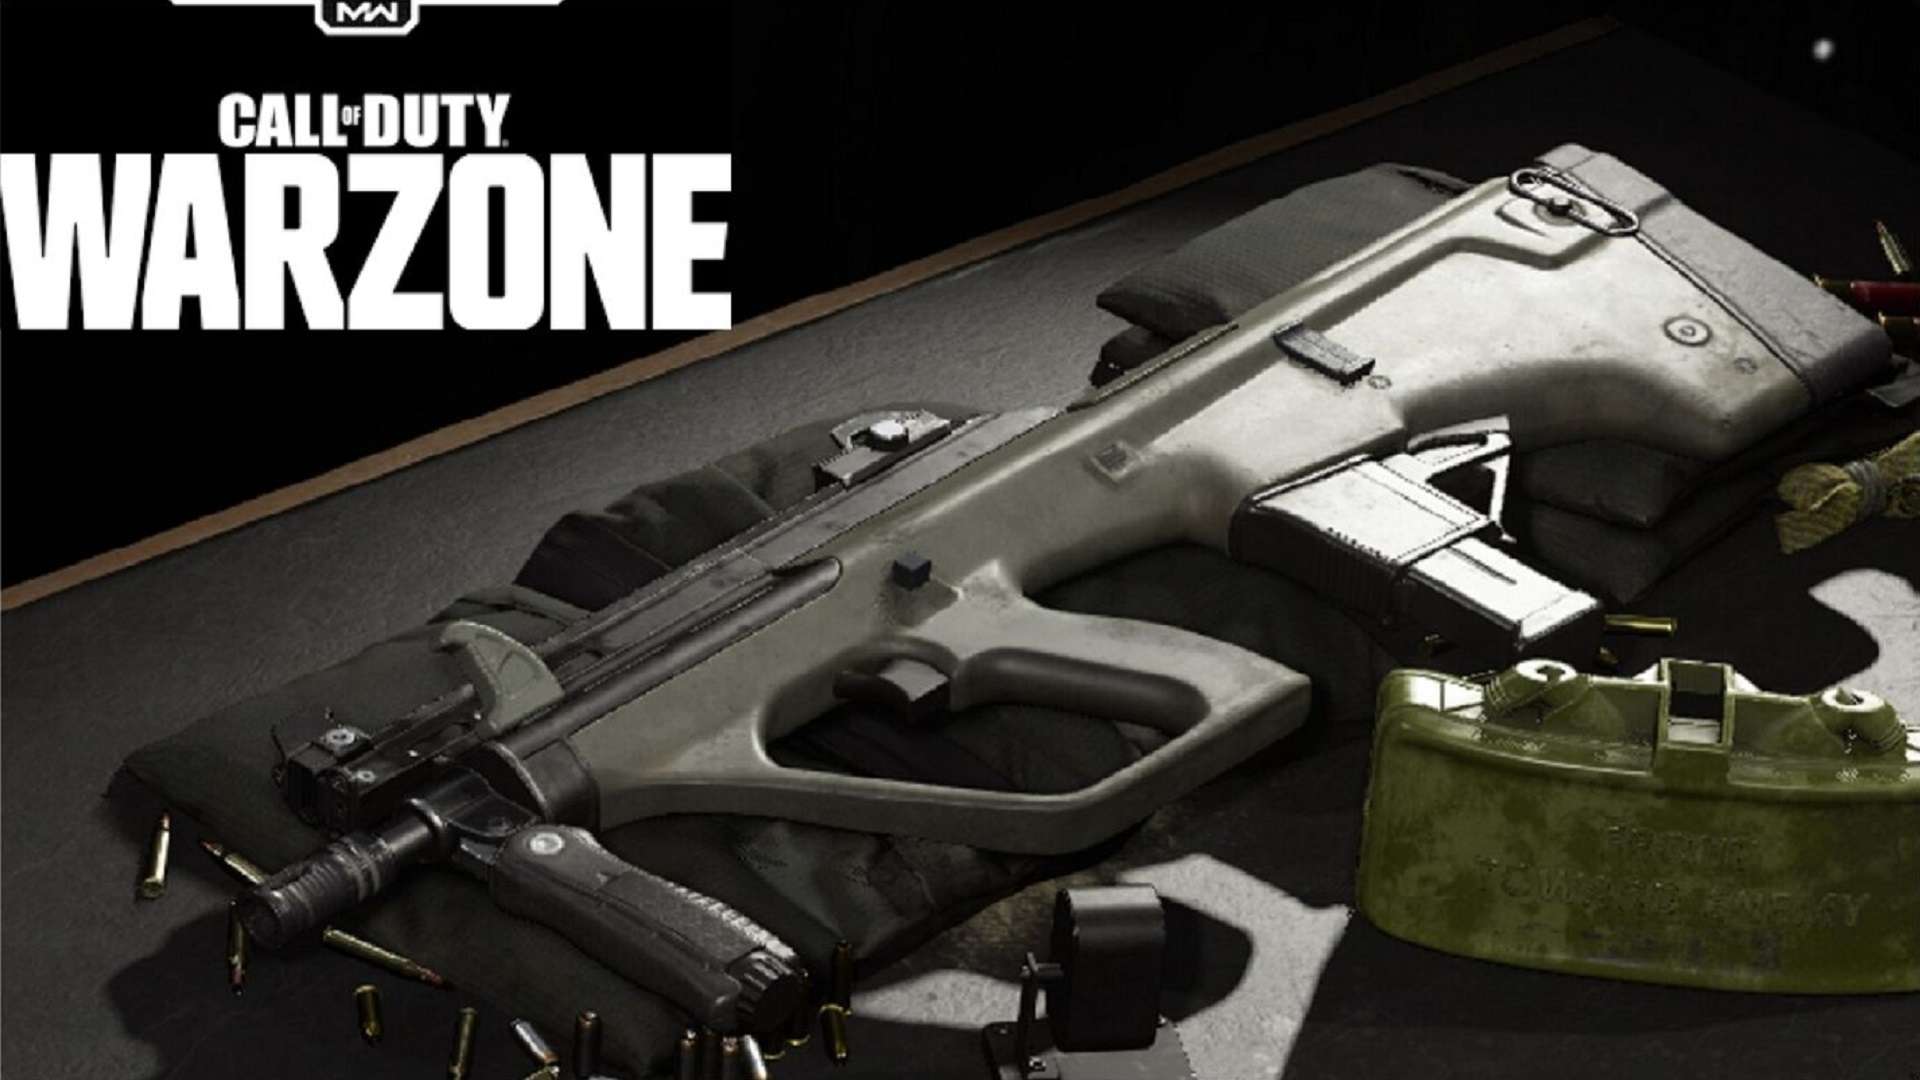 Call of Duty / Warzone